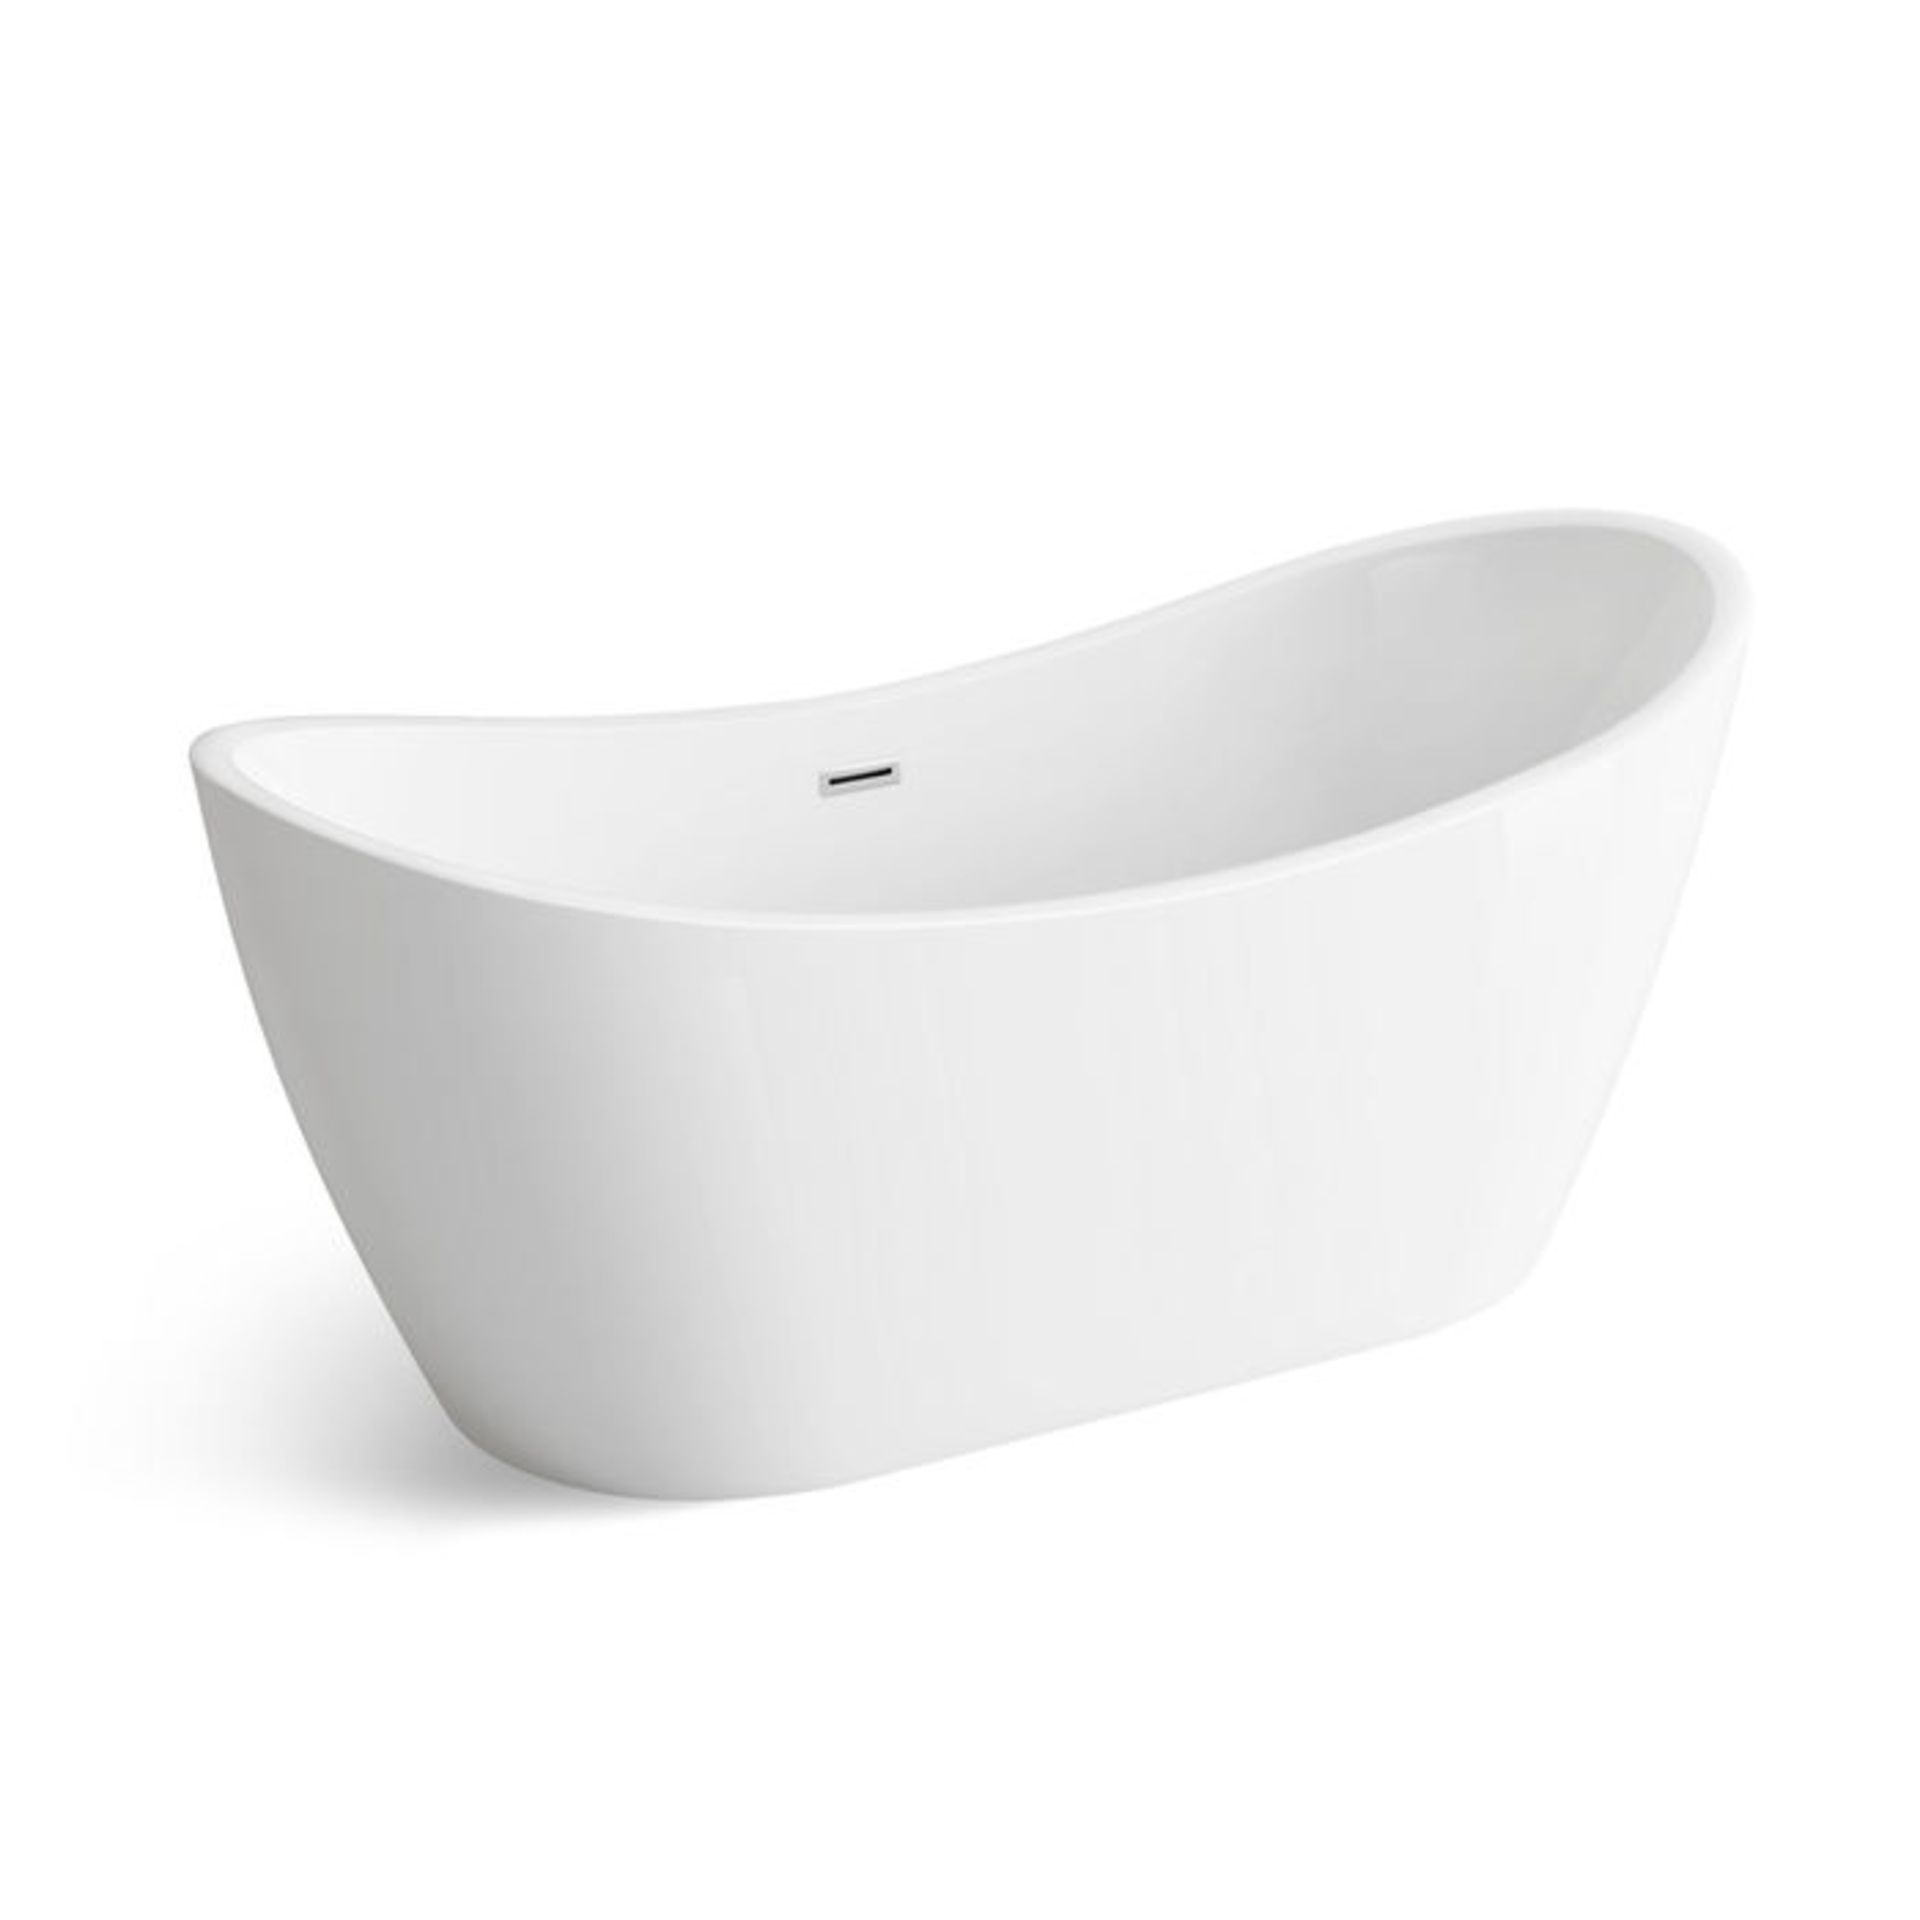 (T4) 1700mm x 710mm Caitlyn Freestanding Bath. Visually Simplistic To Suit Any Bathroom Interio... - Image 4 of 4